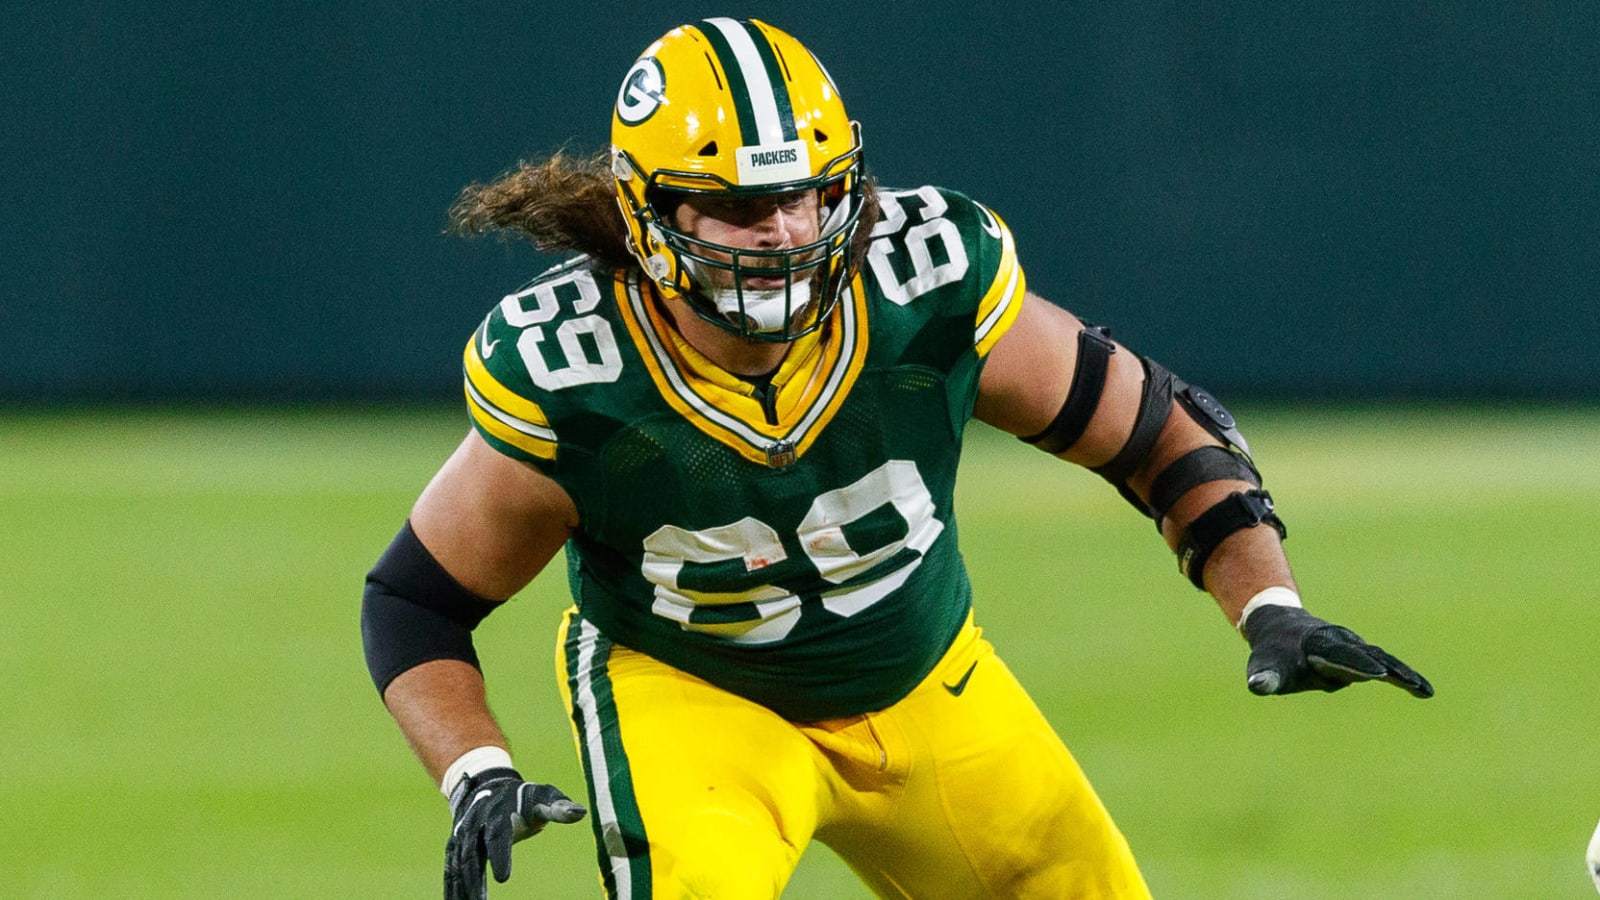 David Bakhtiari becomes highest-paid OL in NFL history